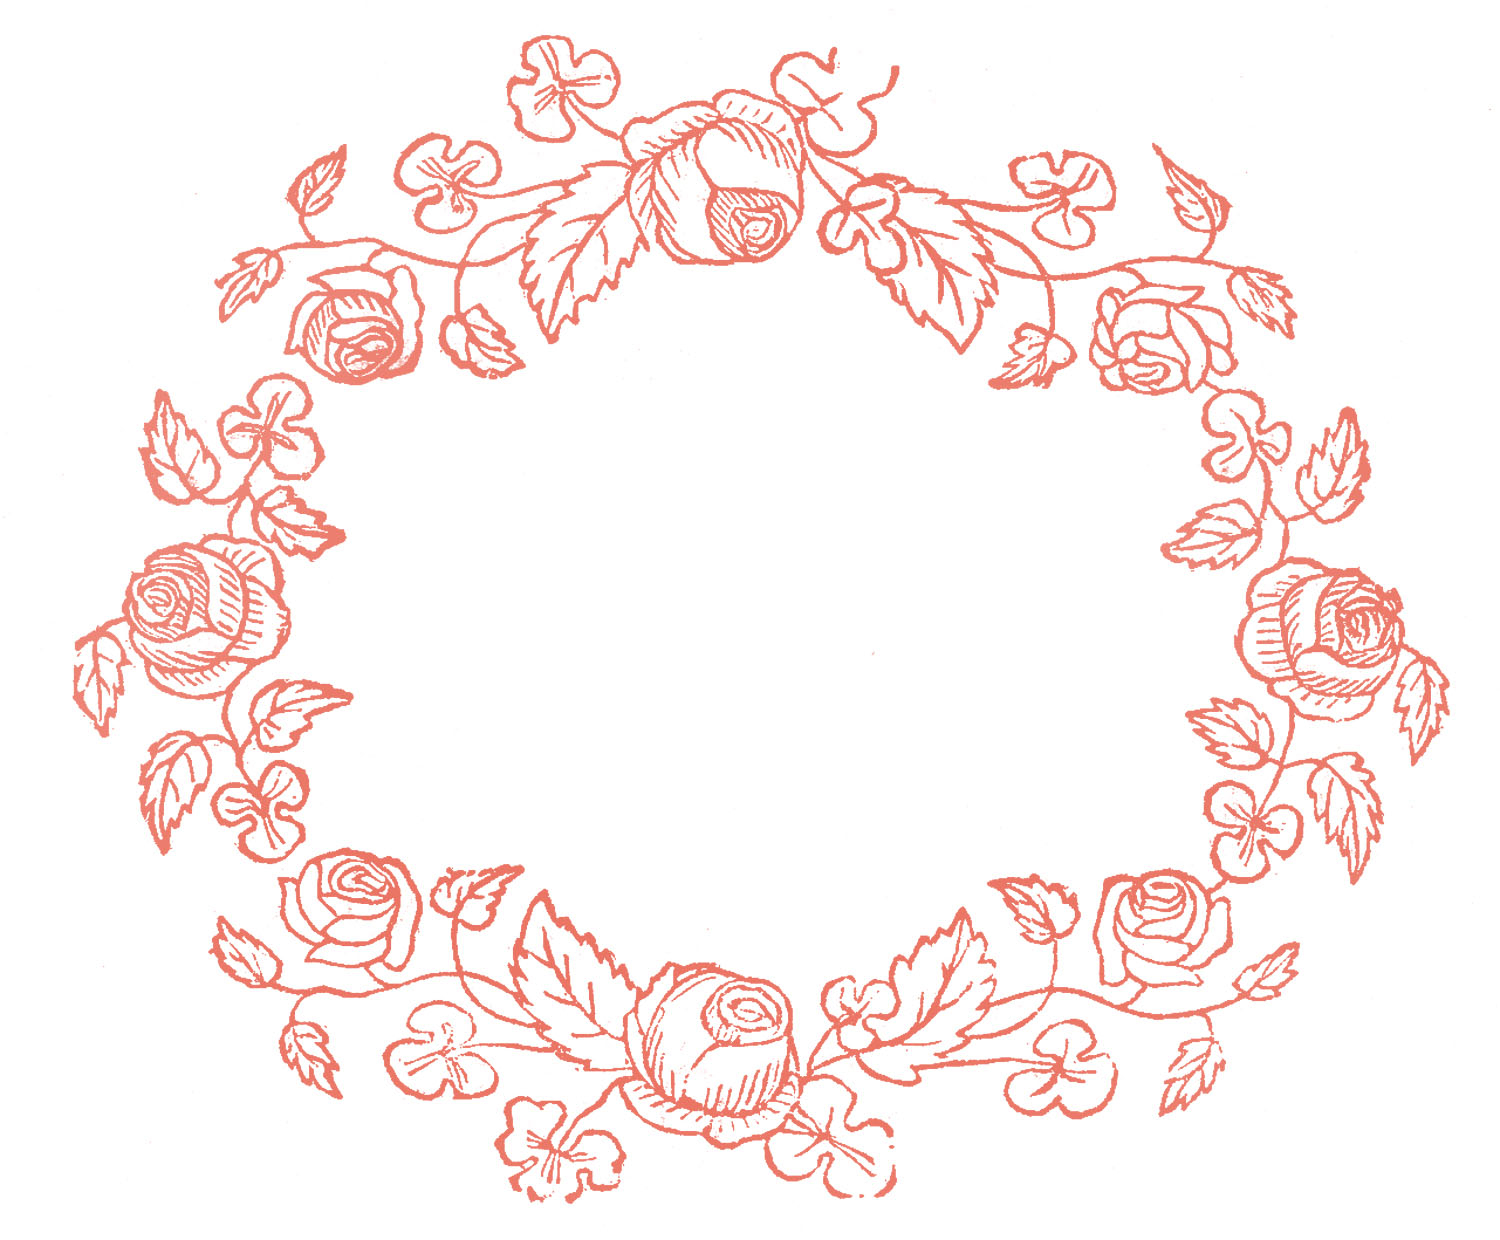 Rose Patterns For Embroidery Royalty Free Images Rose Wreaths Embroidery Pattern The